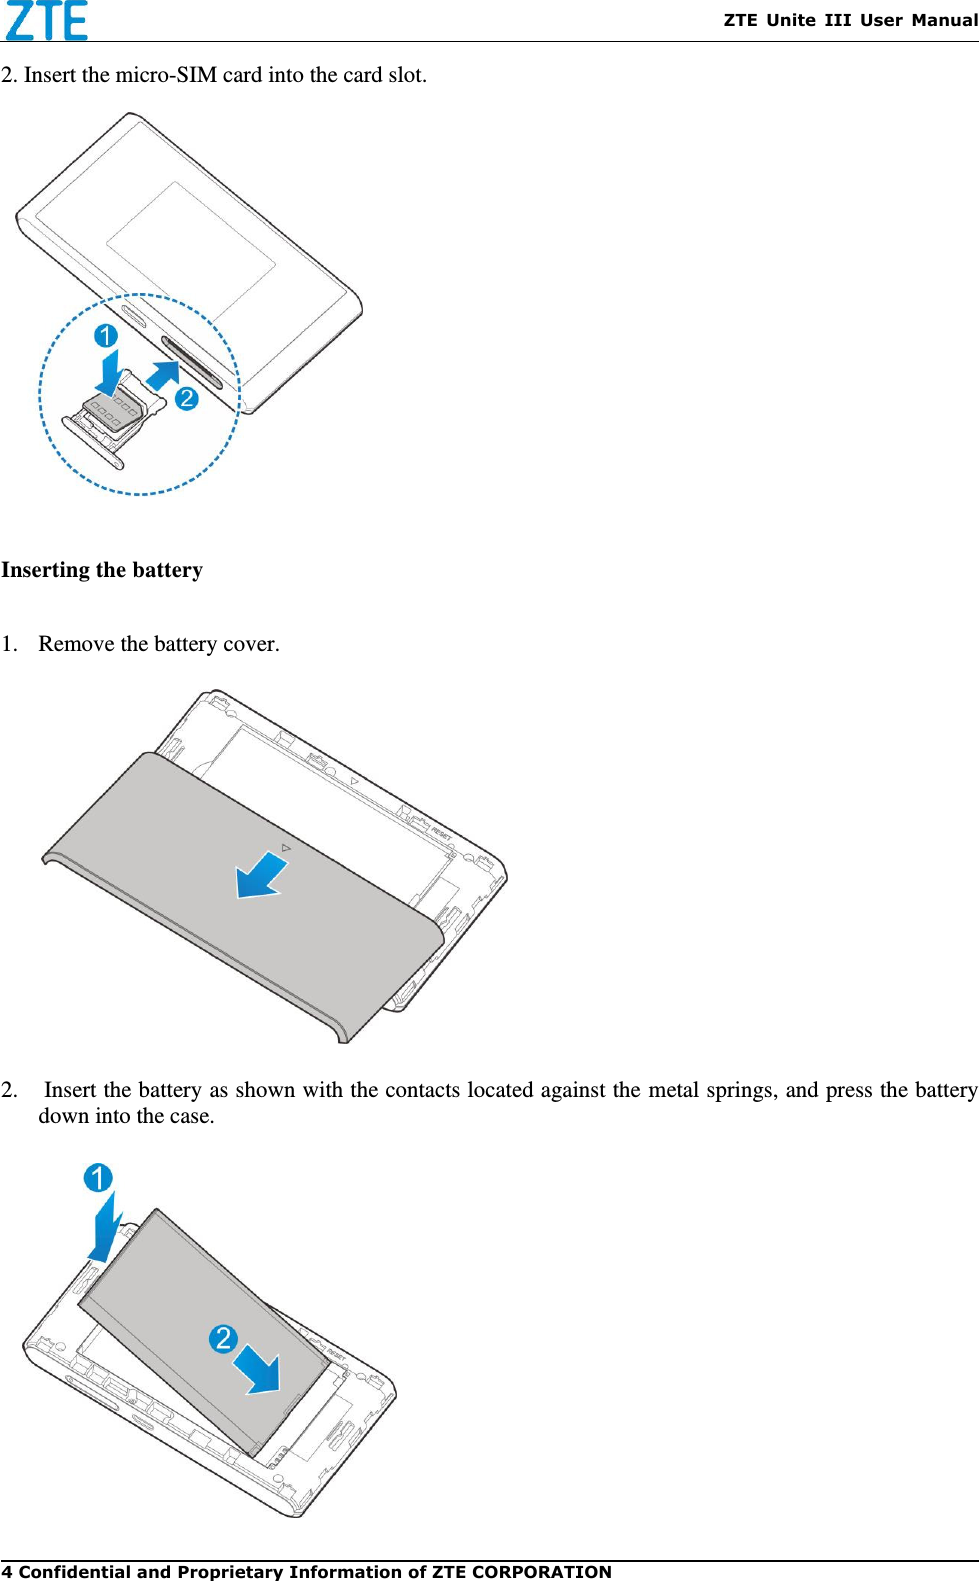    ZTE  Unite  III  User  Manual 4 Confidential and Proprietary Information of ZTE CORPORATION 2. Insert the micro-SIM card into the card slot.           Inserting the battery  1. Remove the battery cover.  2.  Insert the battery as shown with the contacts located against the metal springs, and press the battery down into the case.   